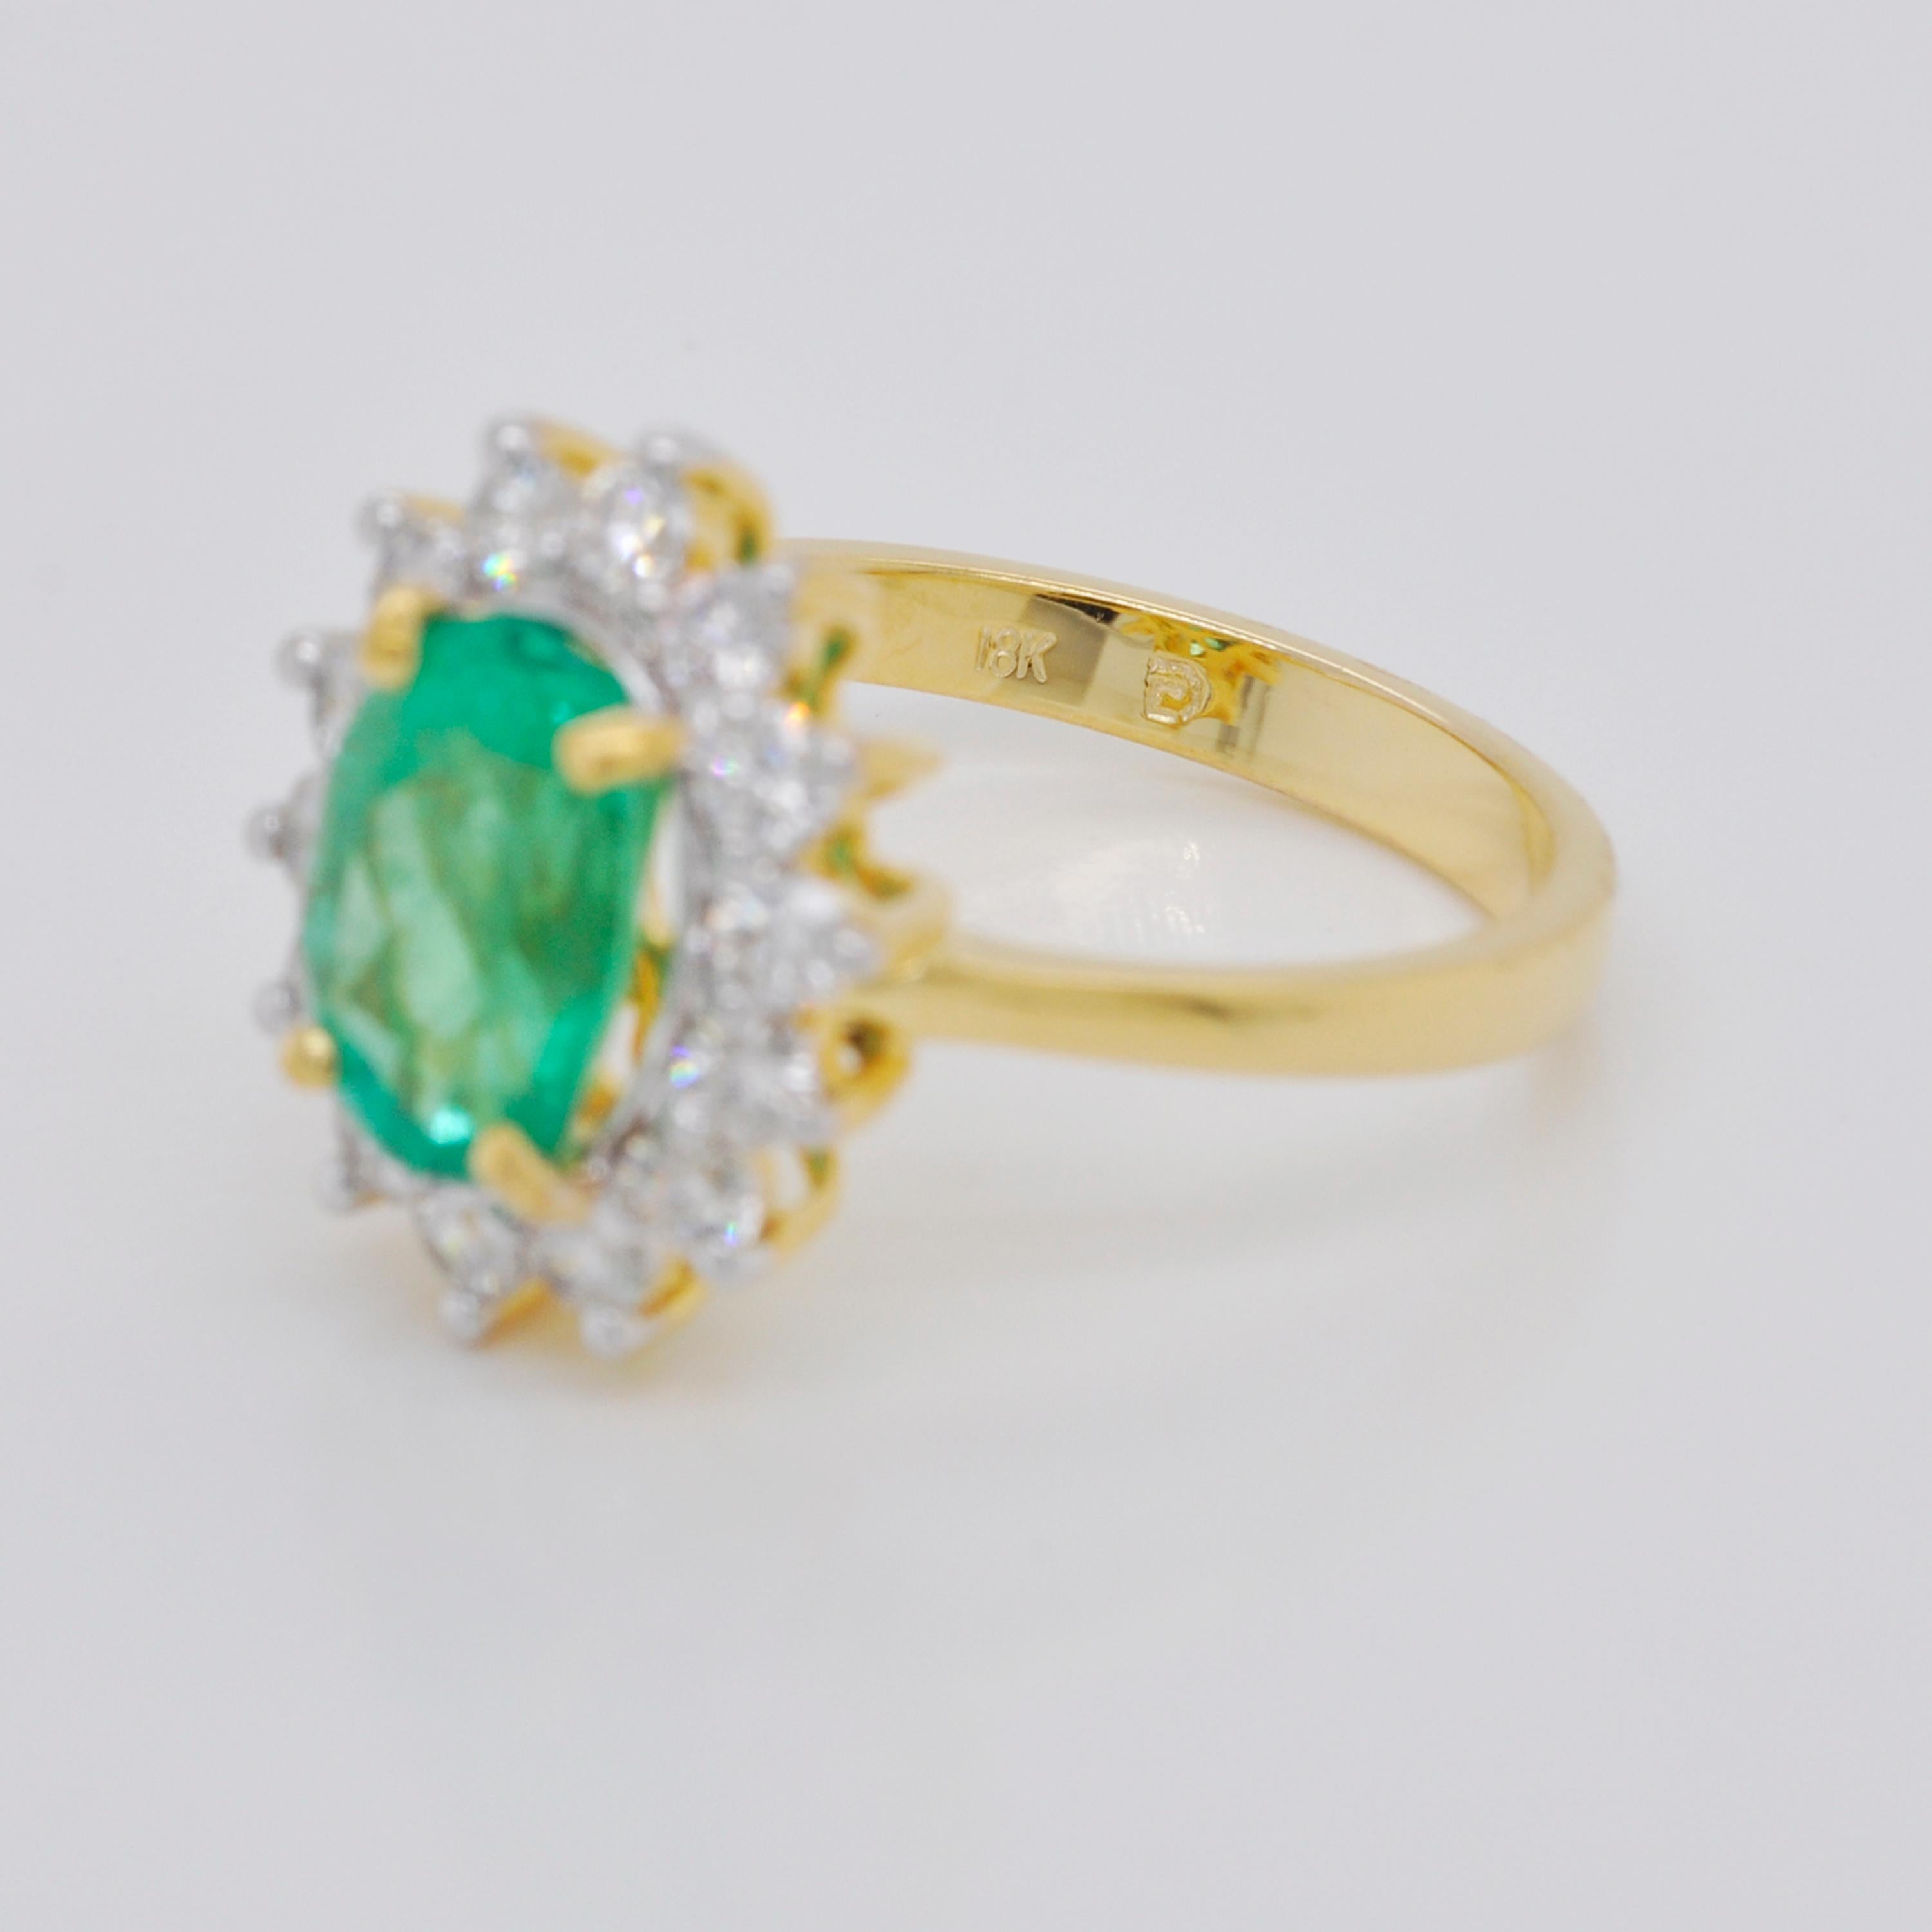 18 Karat Gold Certified Oval Colombian Emerald Diamond Engagement Ring 5